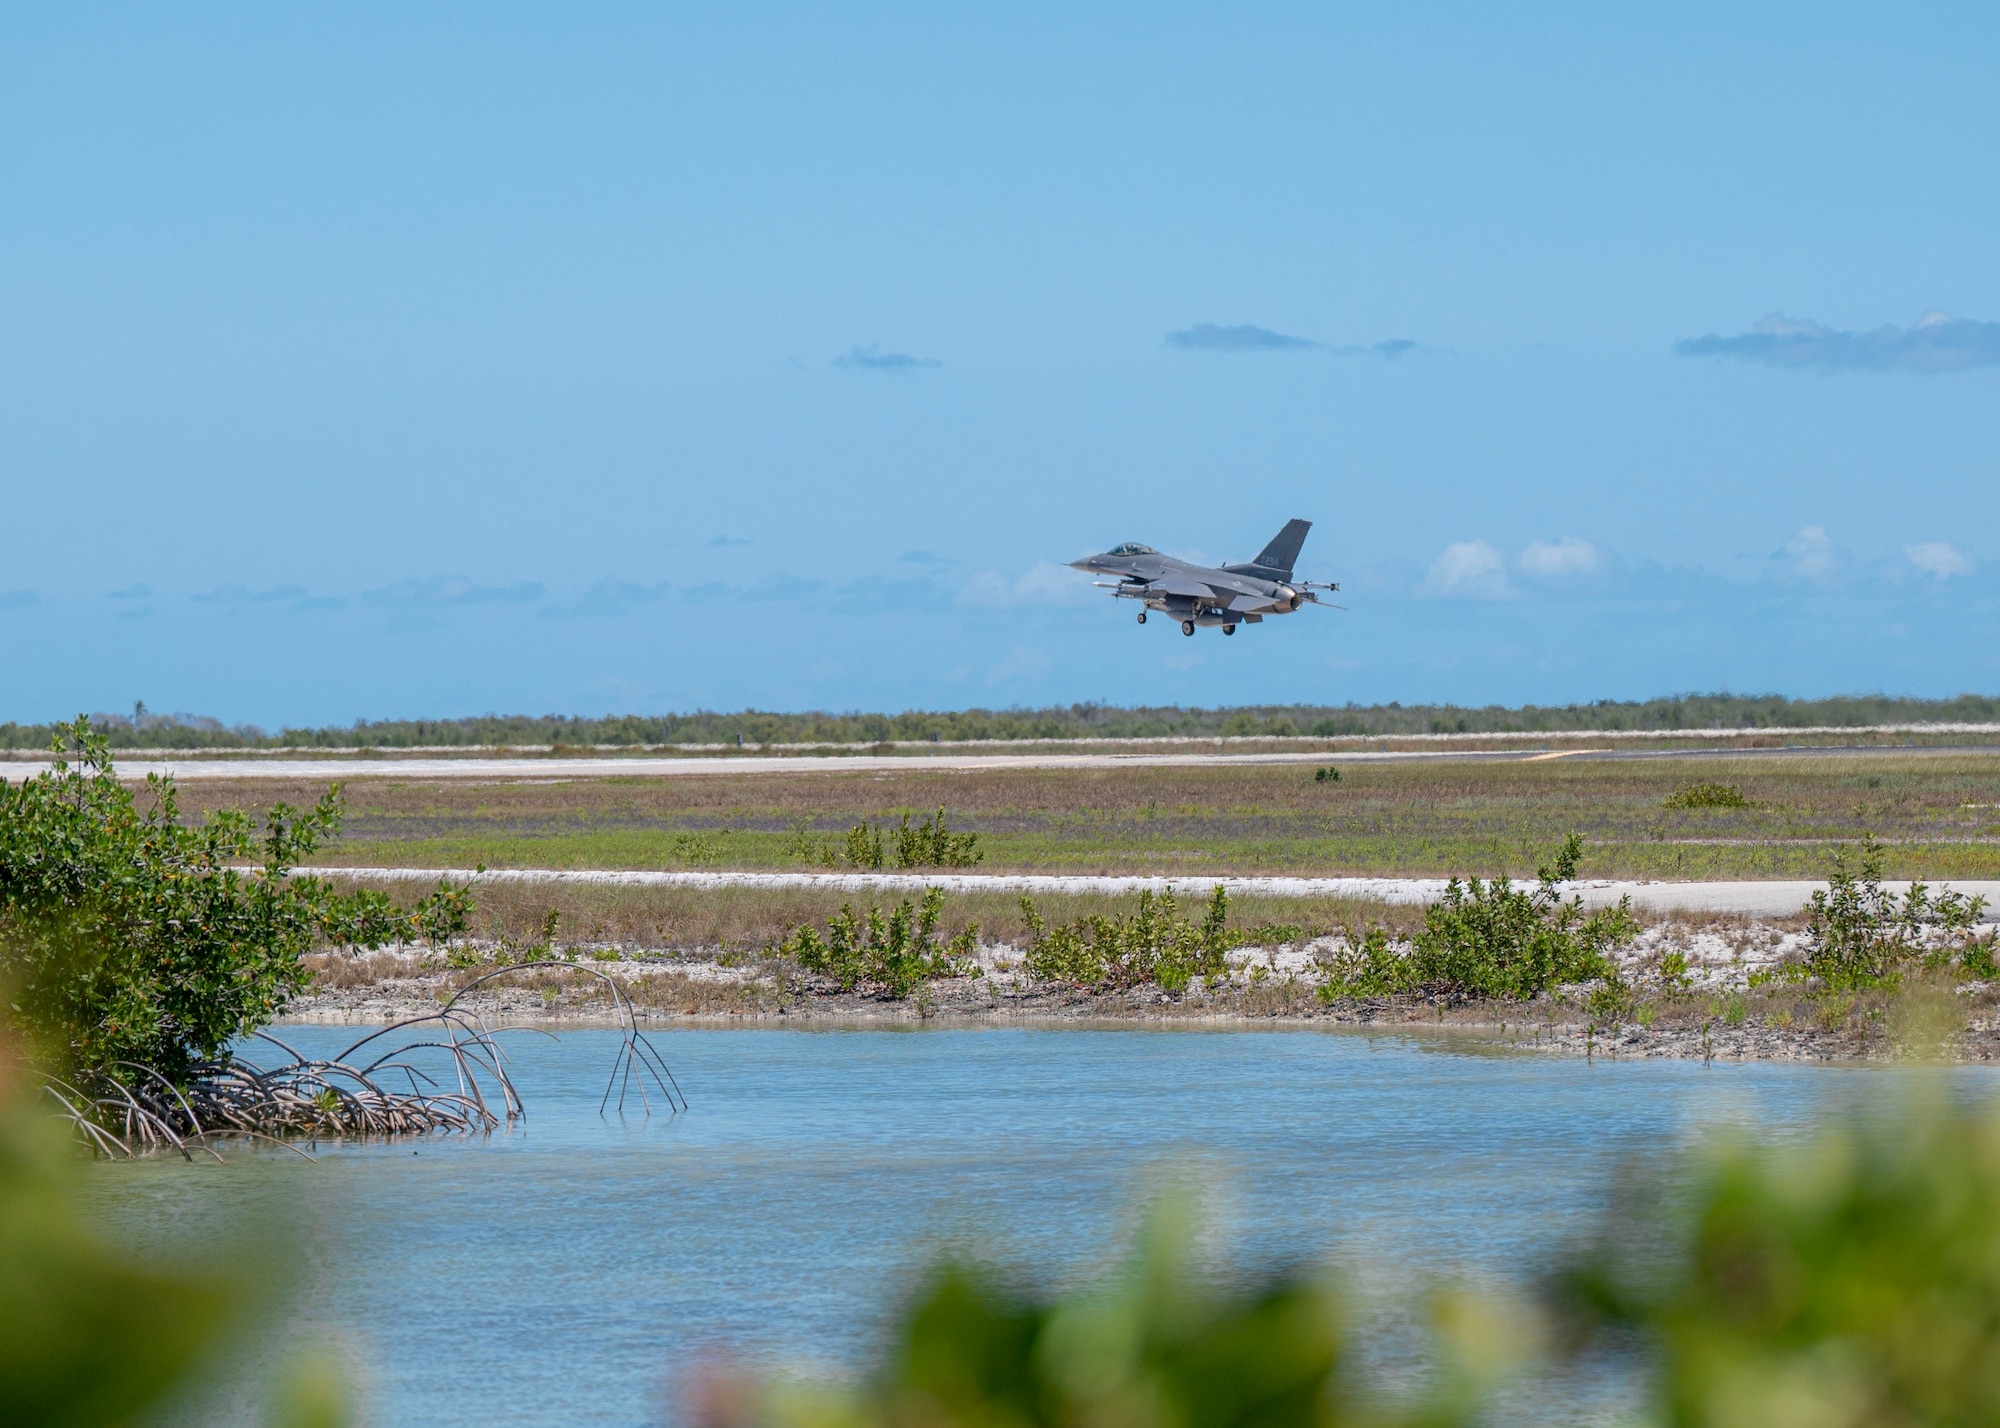 An F-16 Fighting Falcon aircraft lands at Naval Air Station Key West.